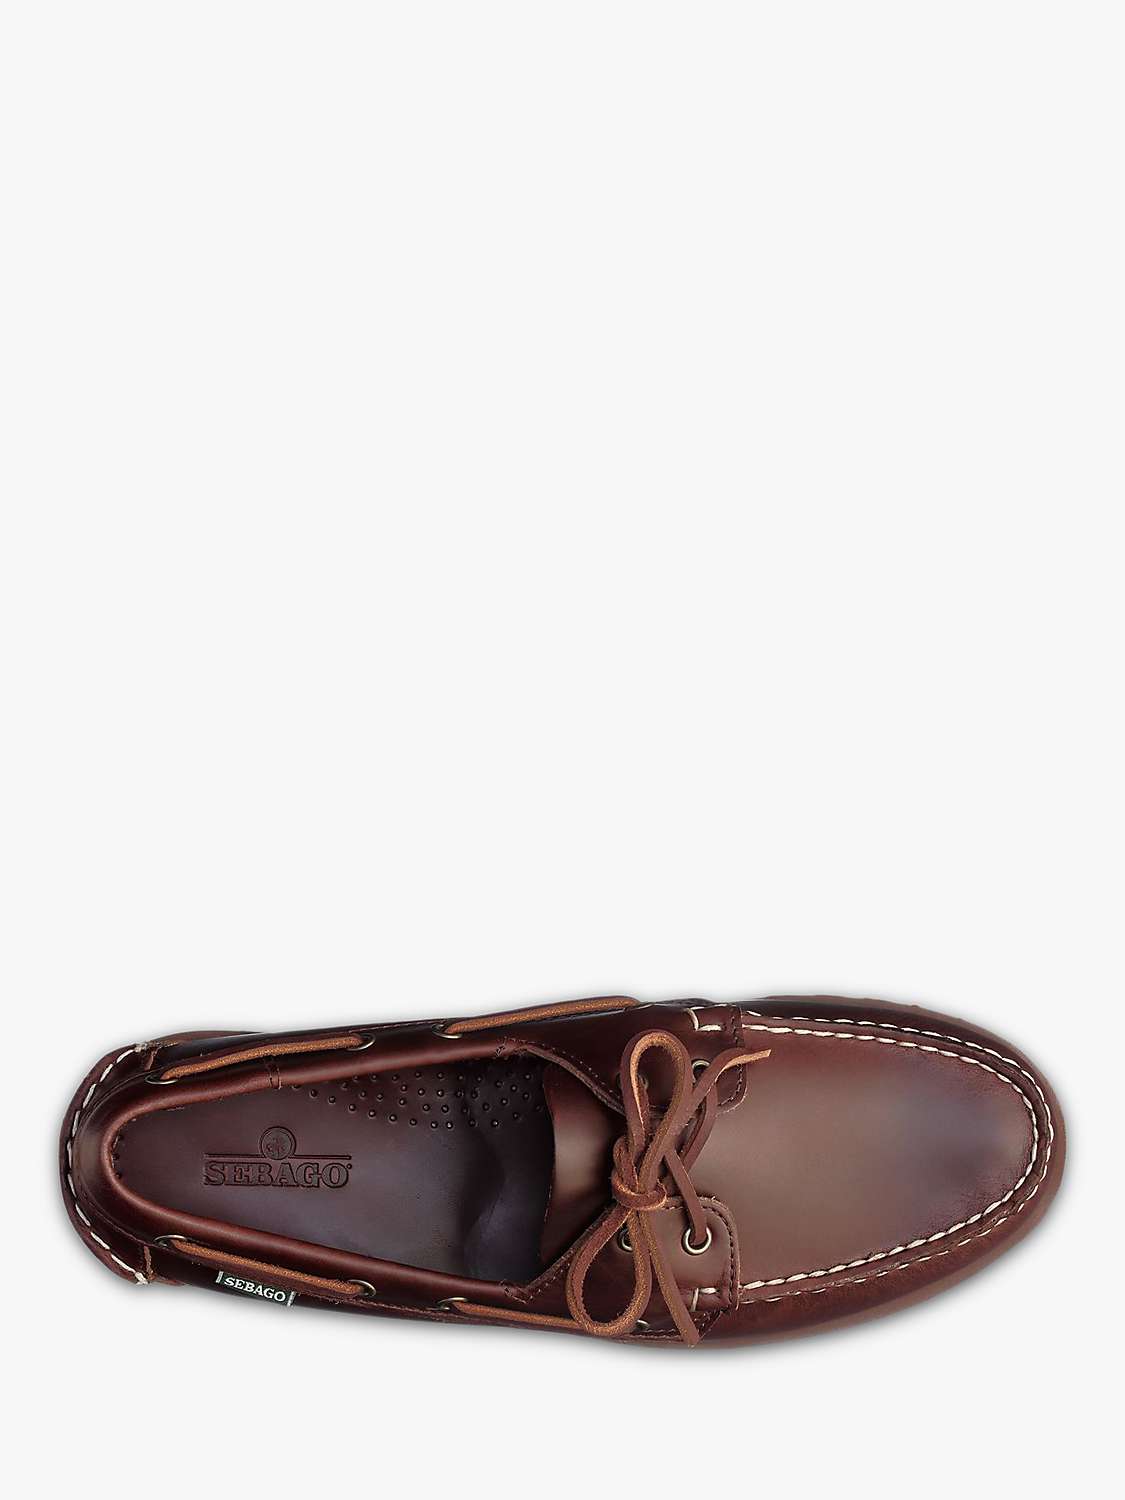 Buy Sebago Ranger Waxy Leather Boat Shoes Online at johnlewis.com